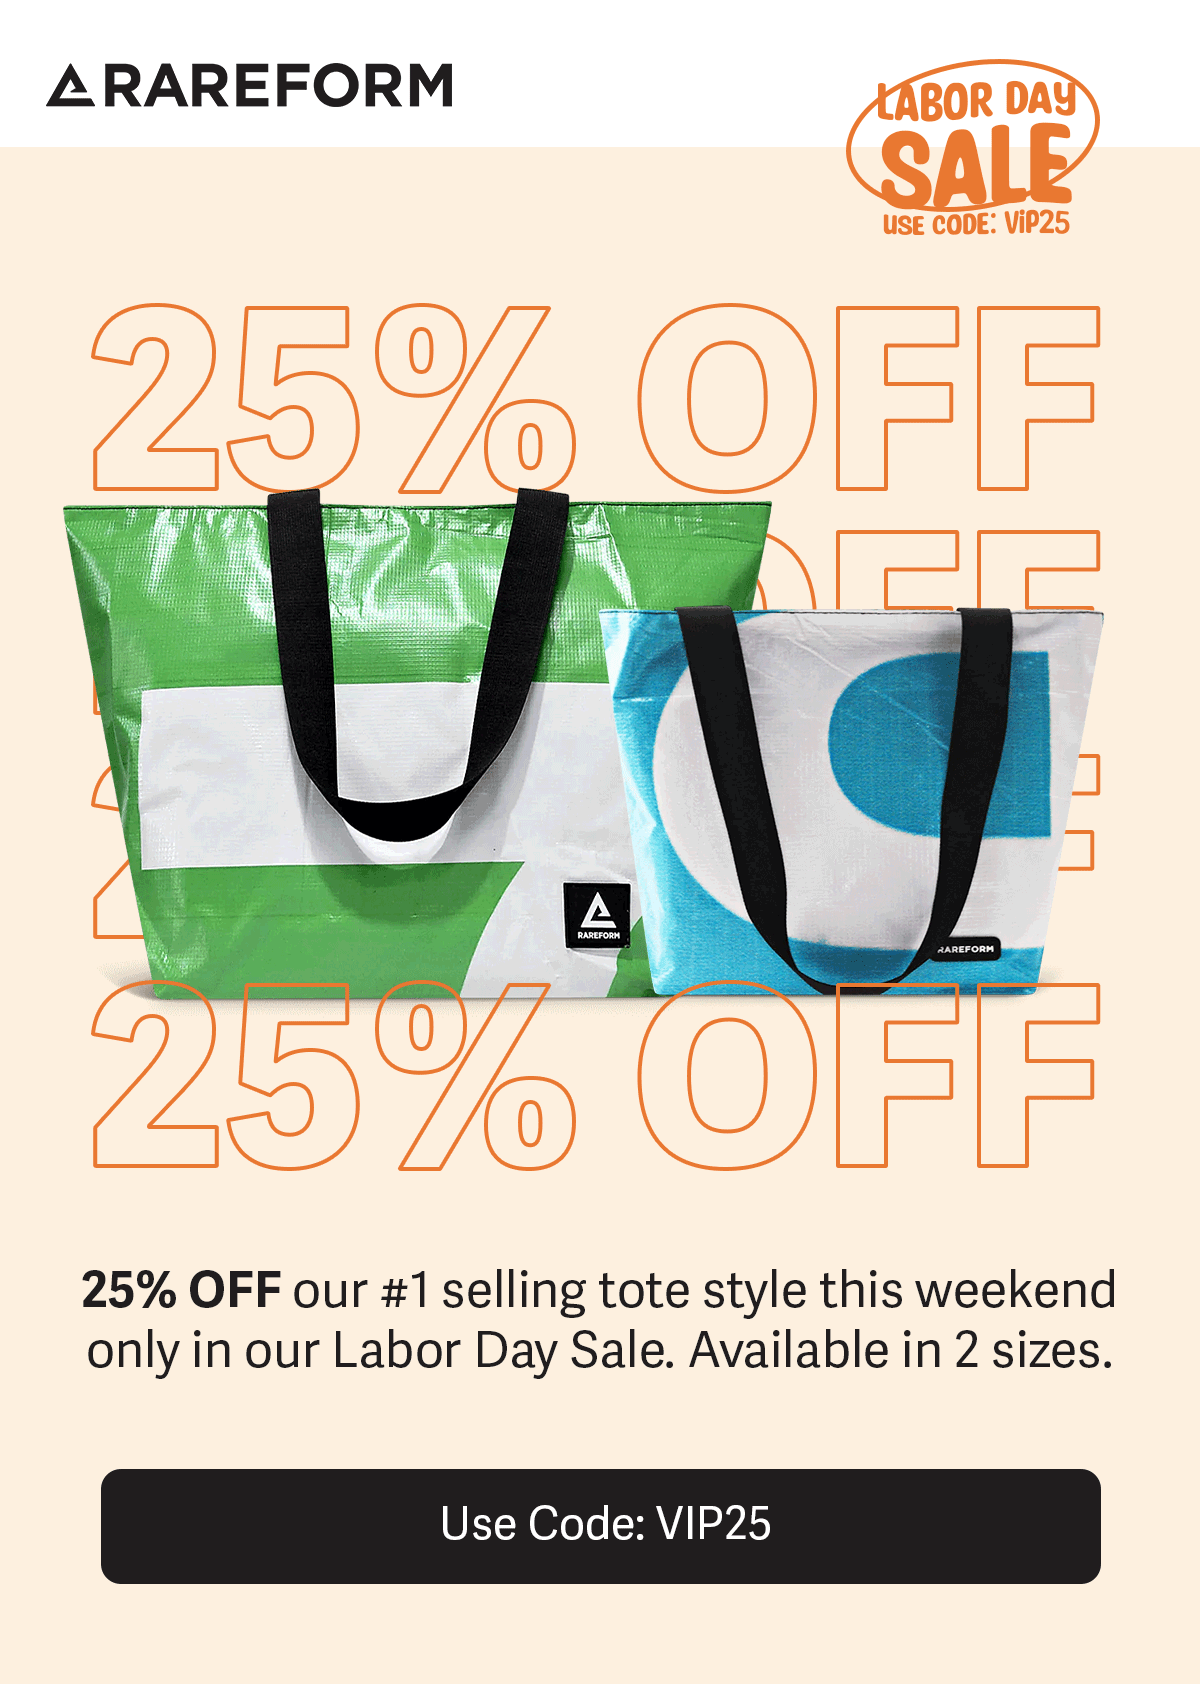 25% your favorite tote